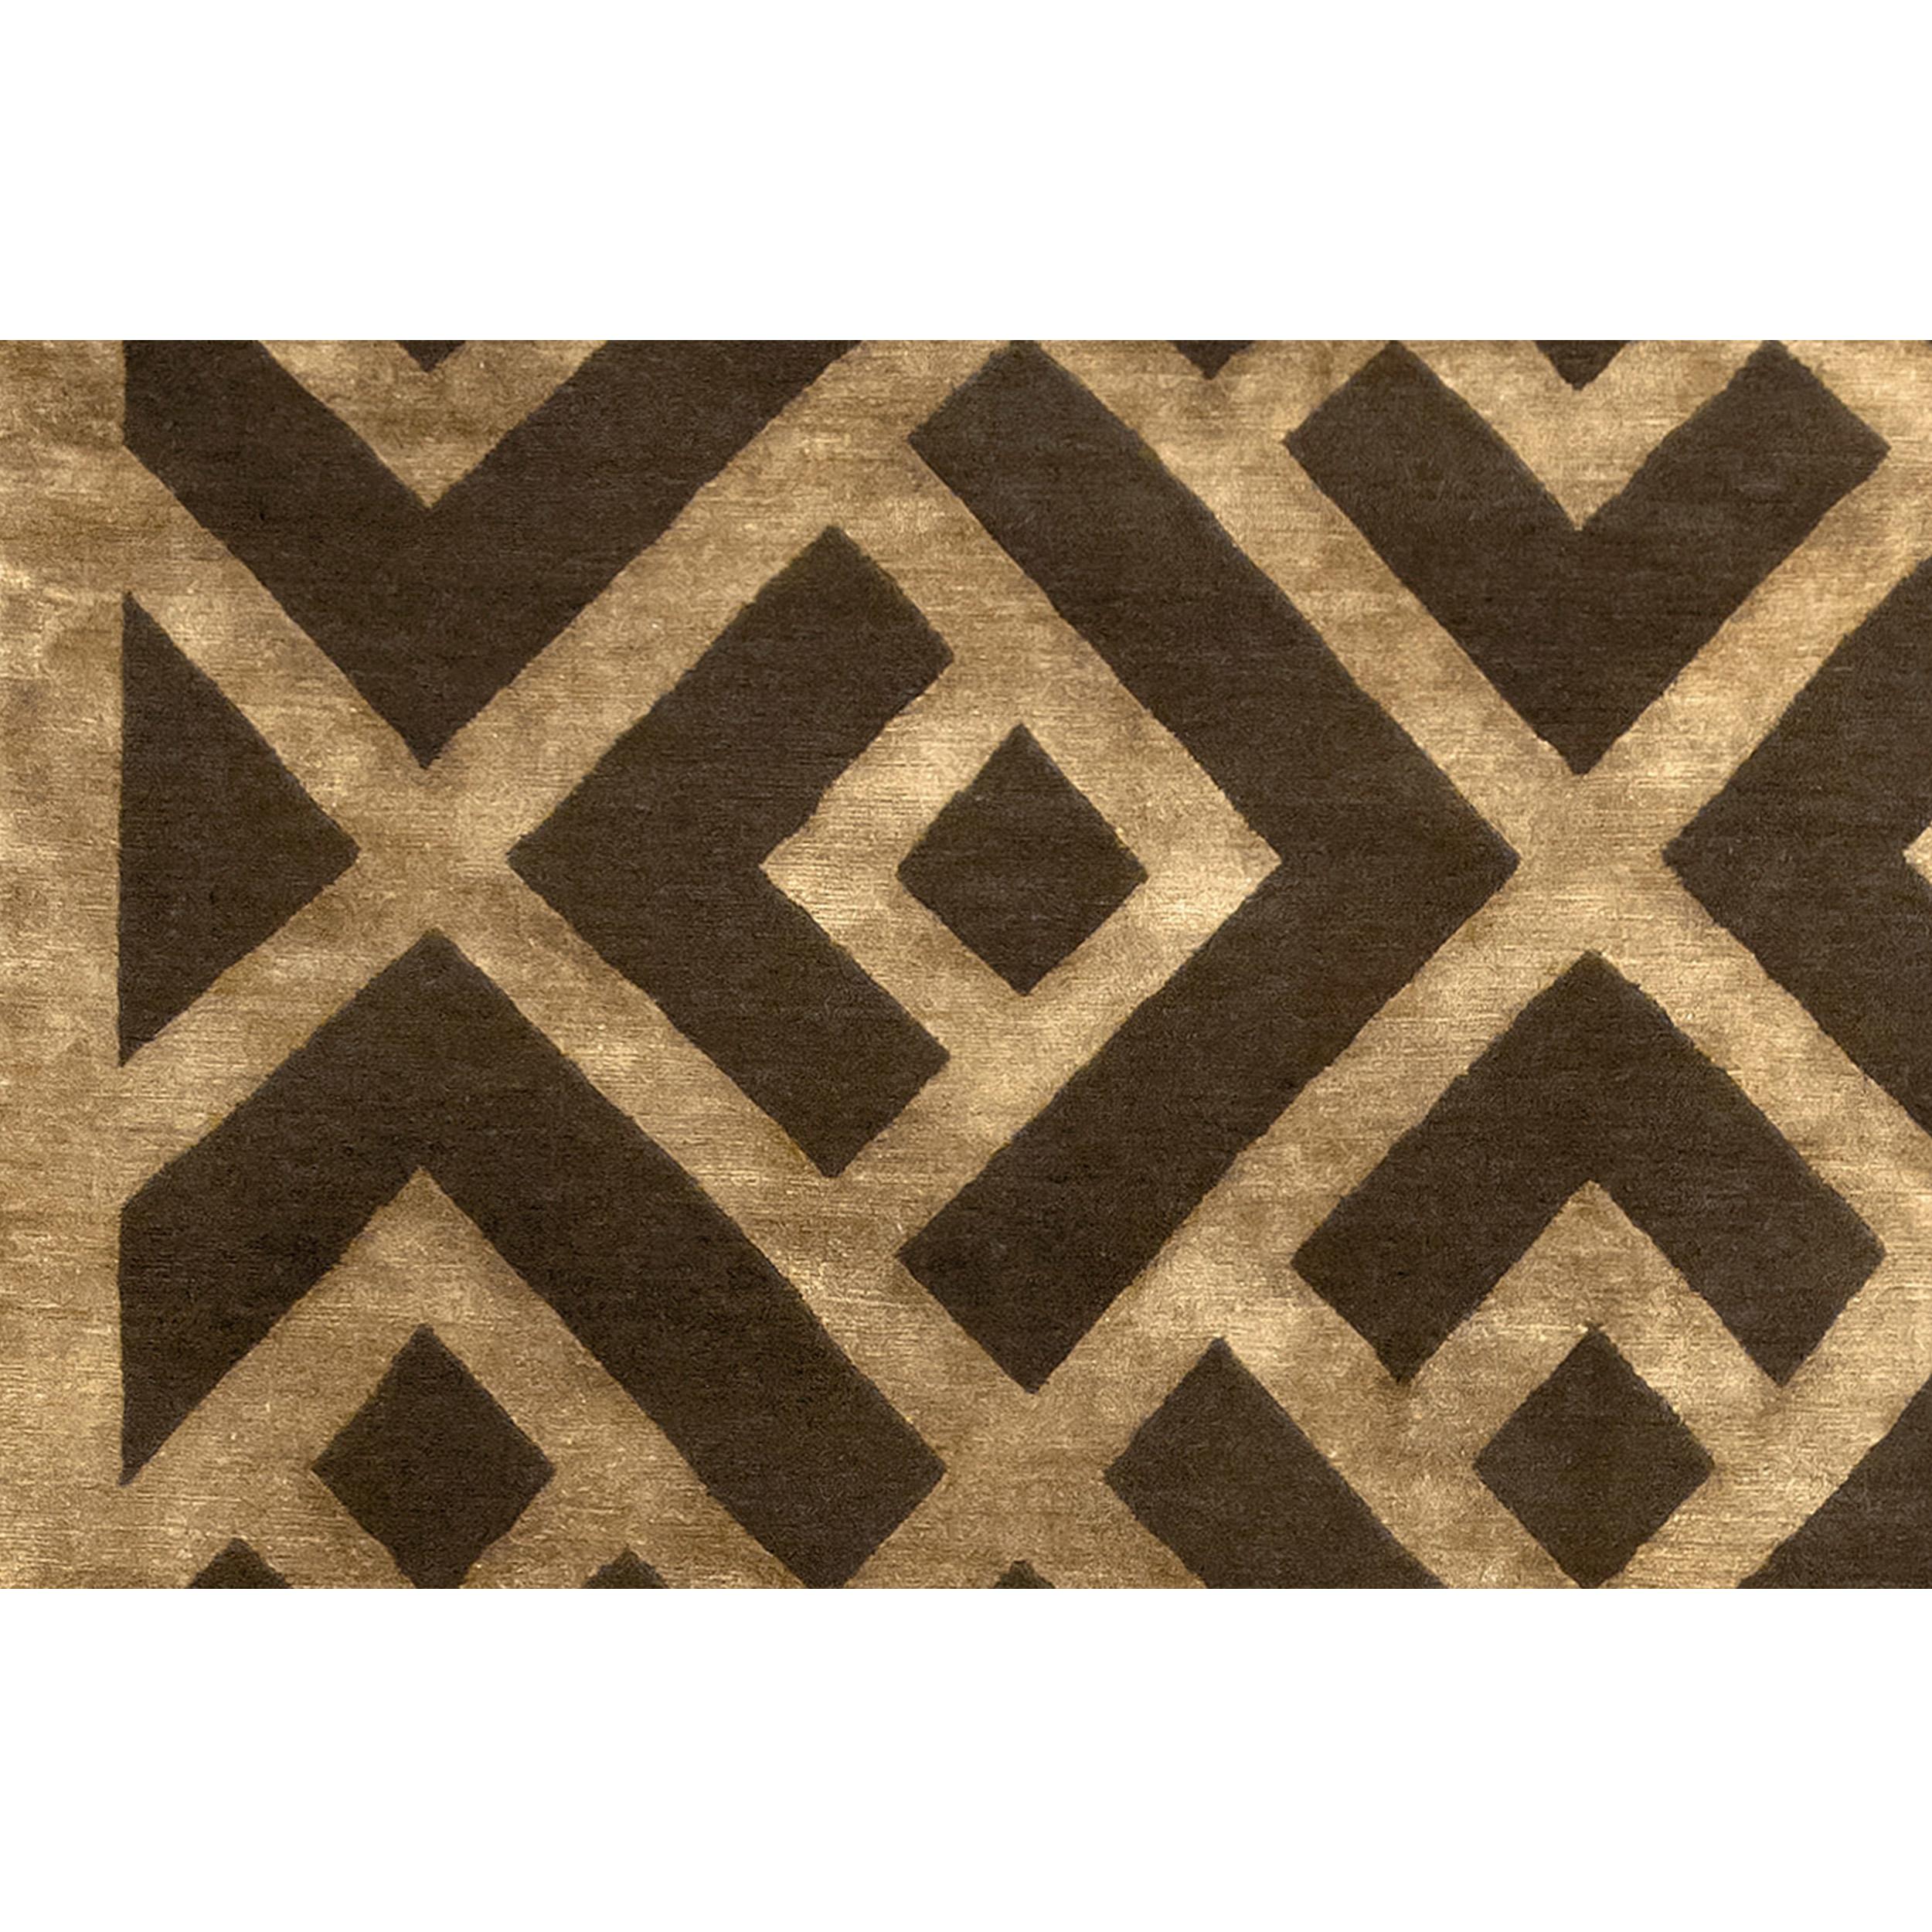 Luxury Modern Hand-Knotted Adaptations Laced Diamond Brown/Gold 12x16 Rug In New Condition For Sale In Secaucus, NJ